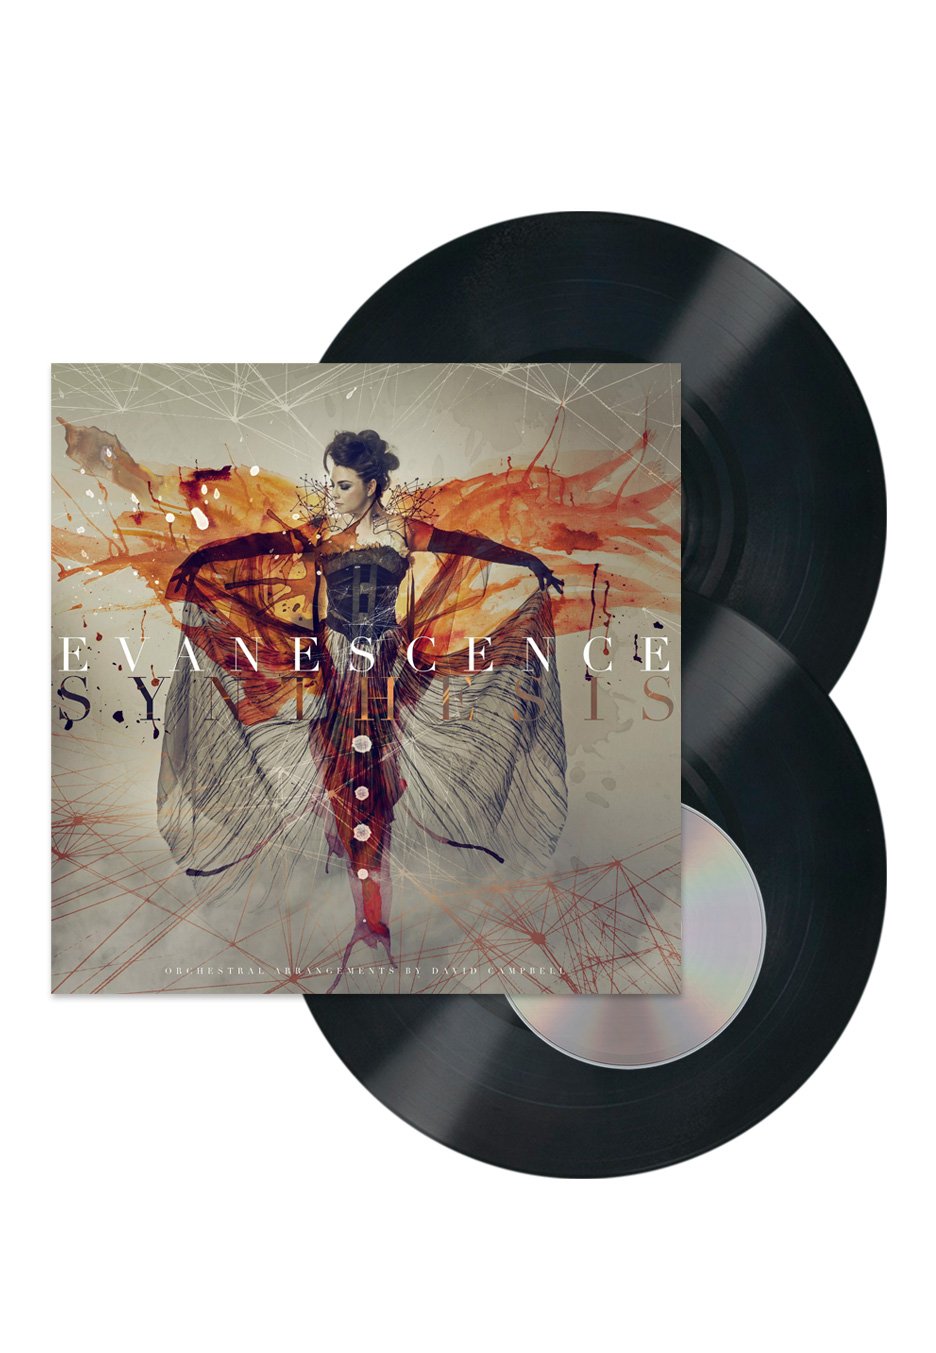 Evanescence - Synthesis - 2 Vinyl + CD